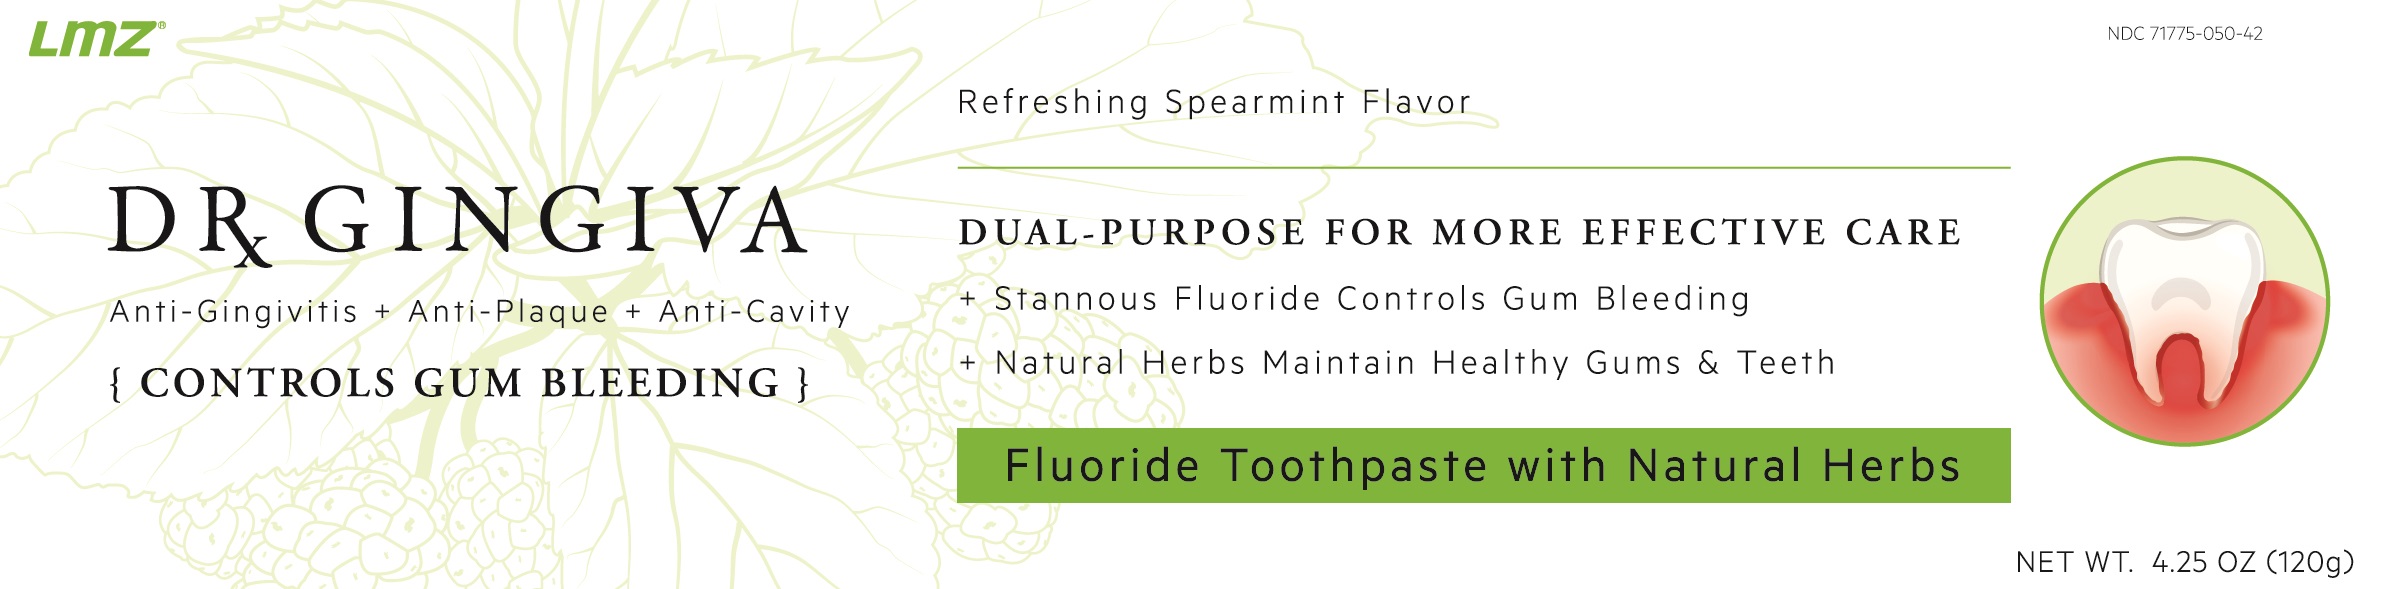 Dr. Gingiva | Fluoride Toothpaste With Natural Herbs Paste while Breastfeeding